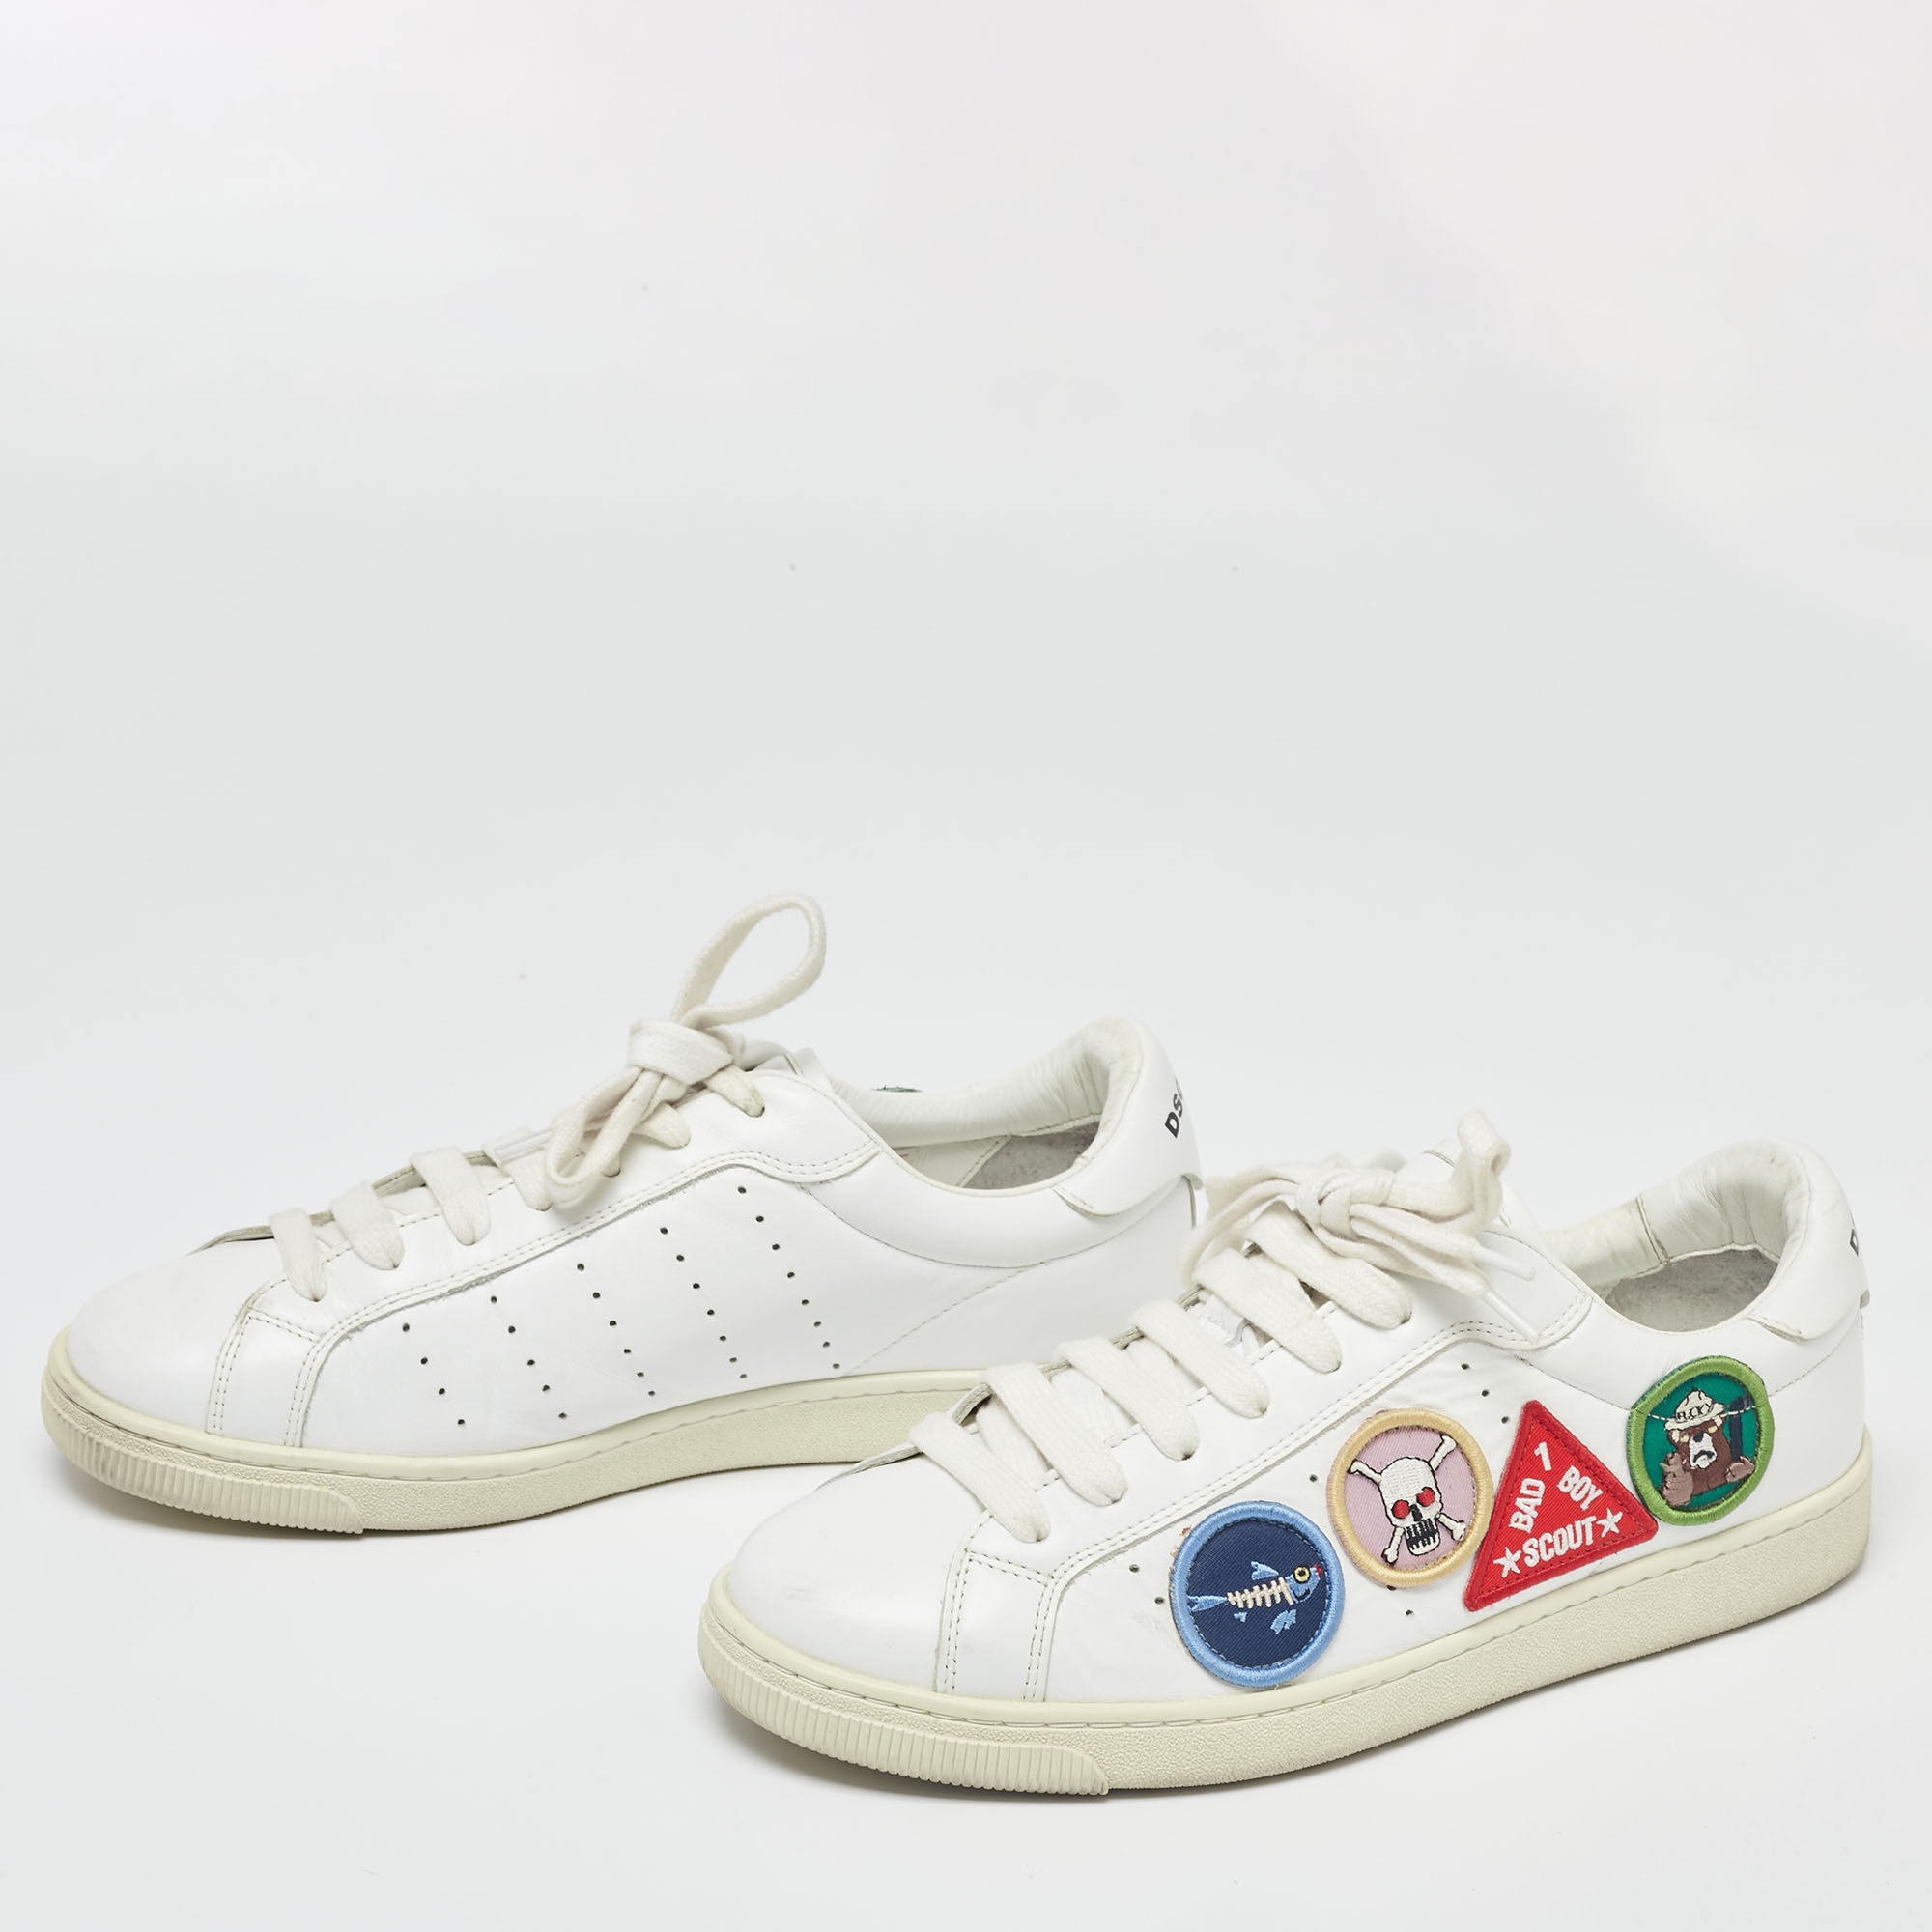 

Dsquared2 White Leather Embroidered Patch Work Lace Up Sneakers Size